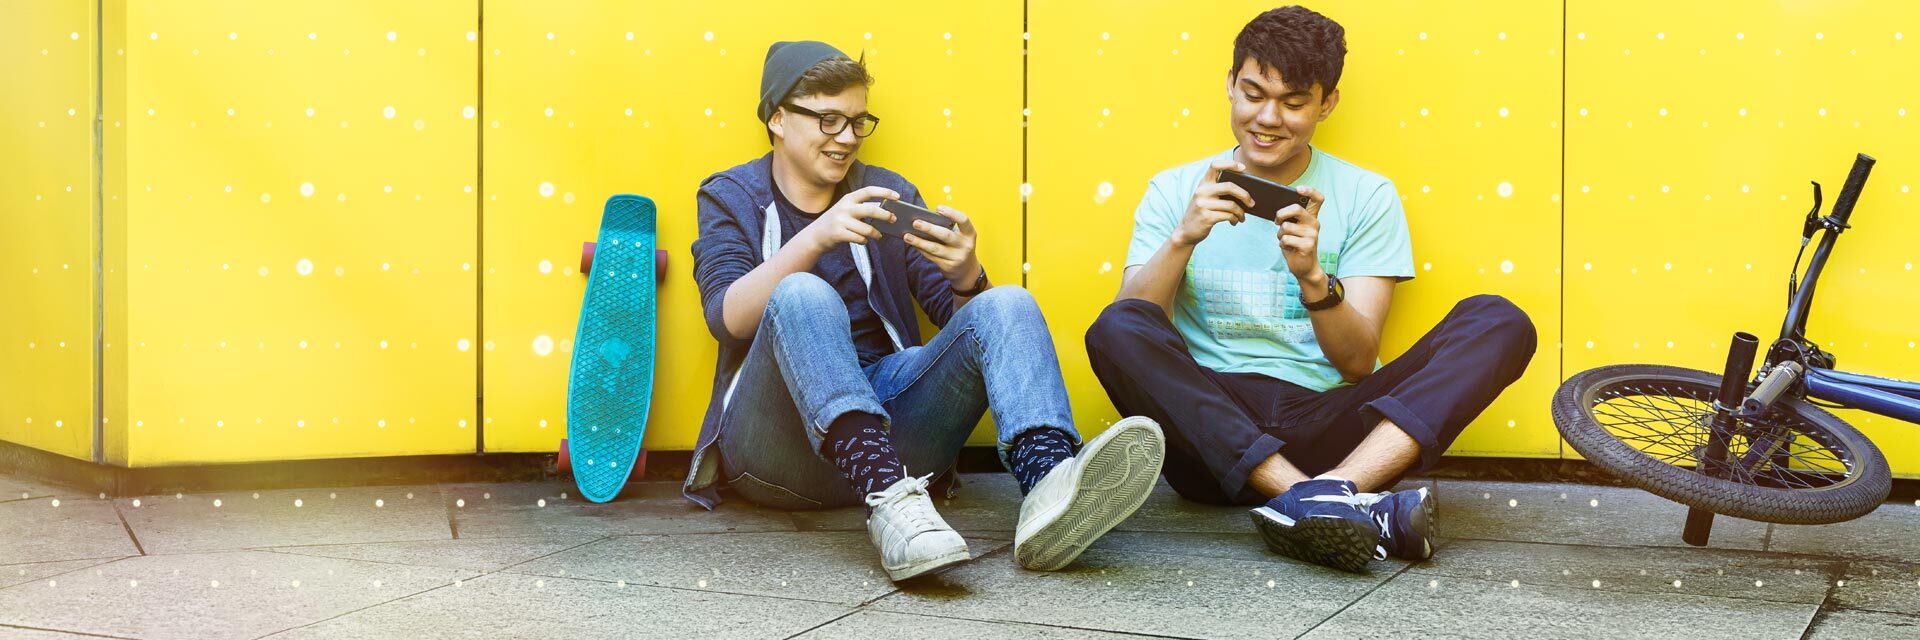 Two students playing a game on their smartphones